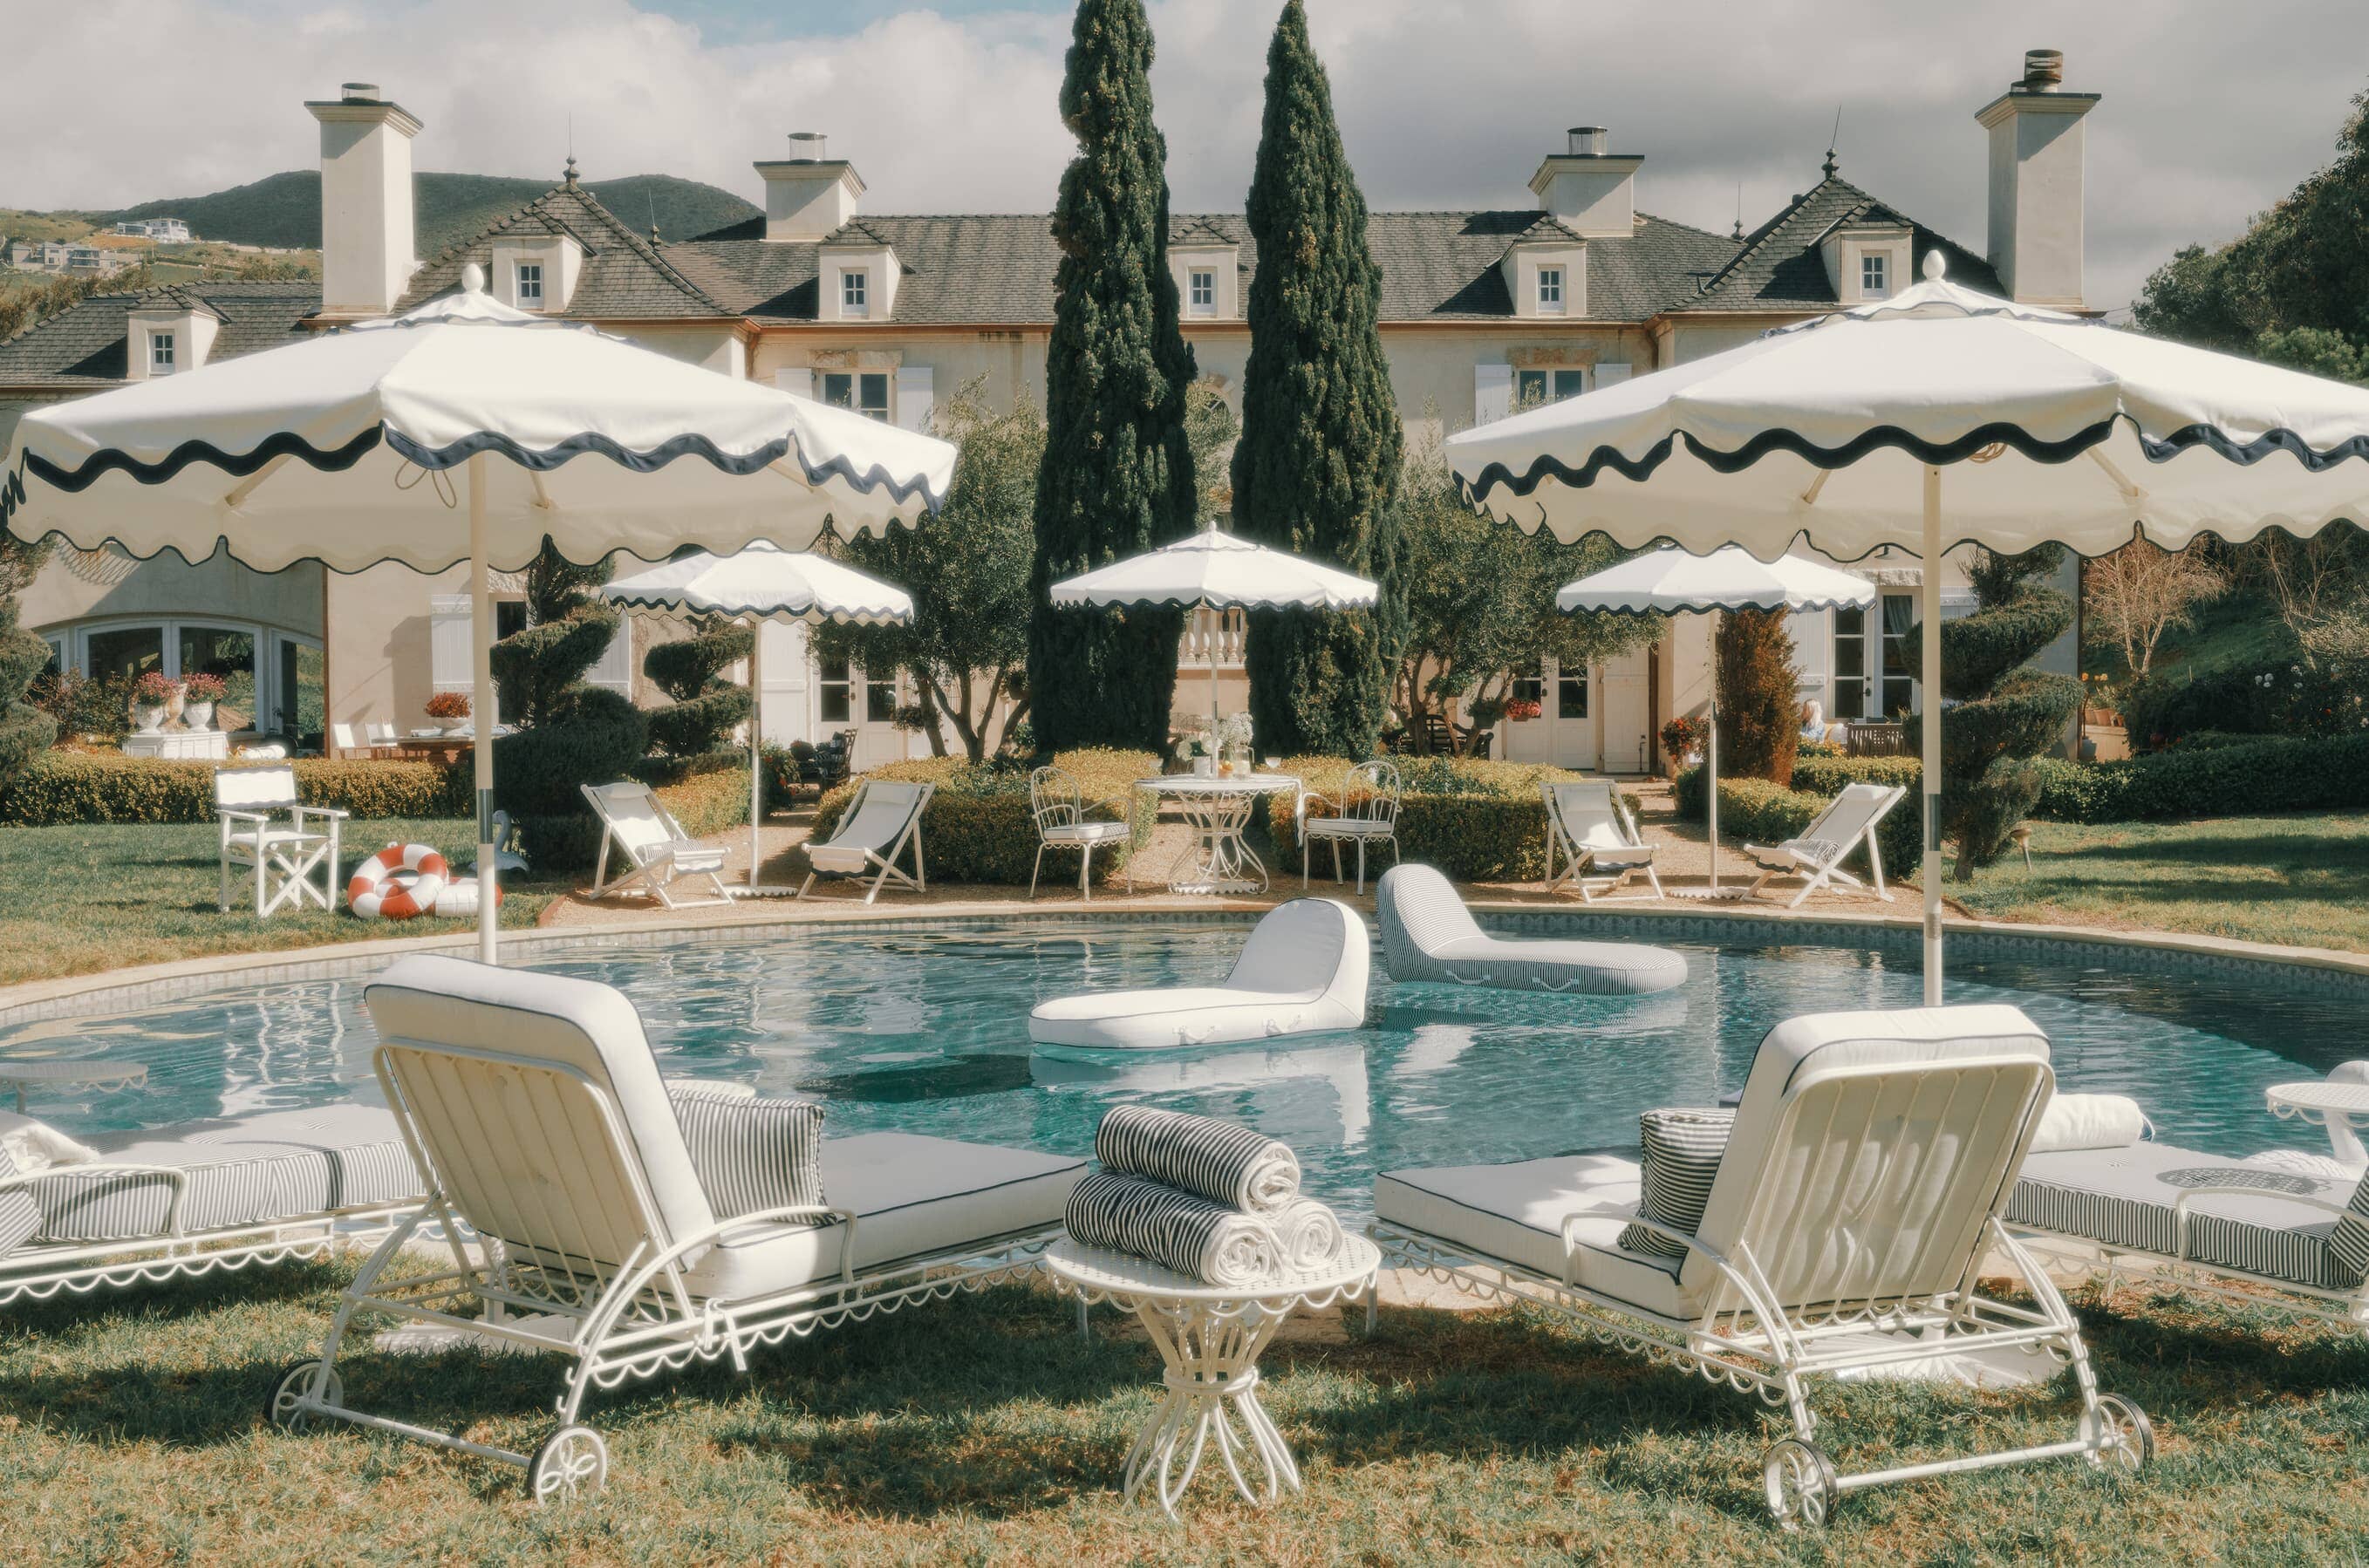 Outdoor pool setting woth riviera white umbrellas, chairs and pool floats